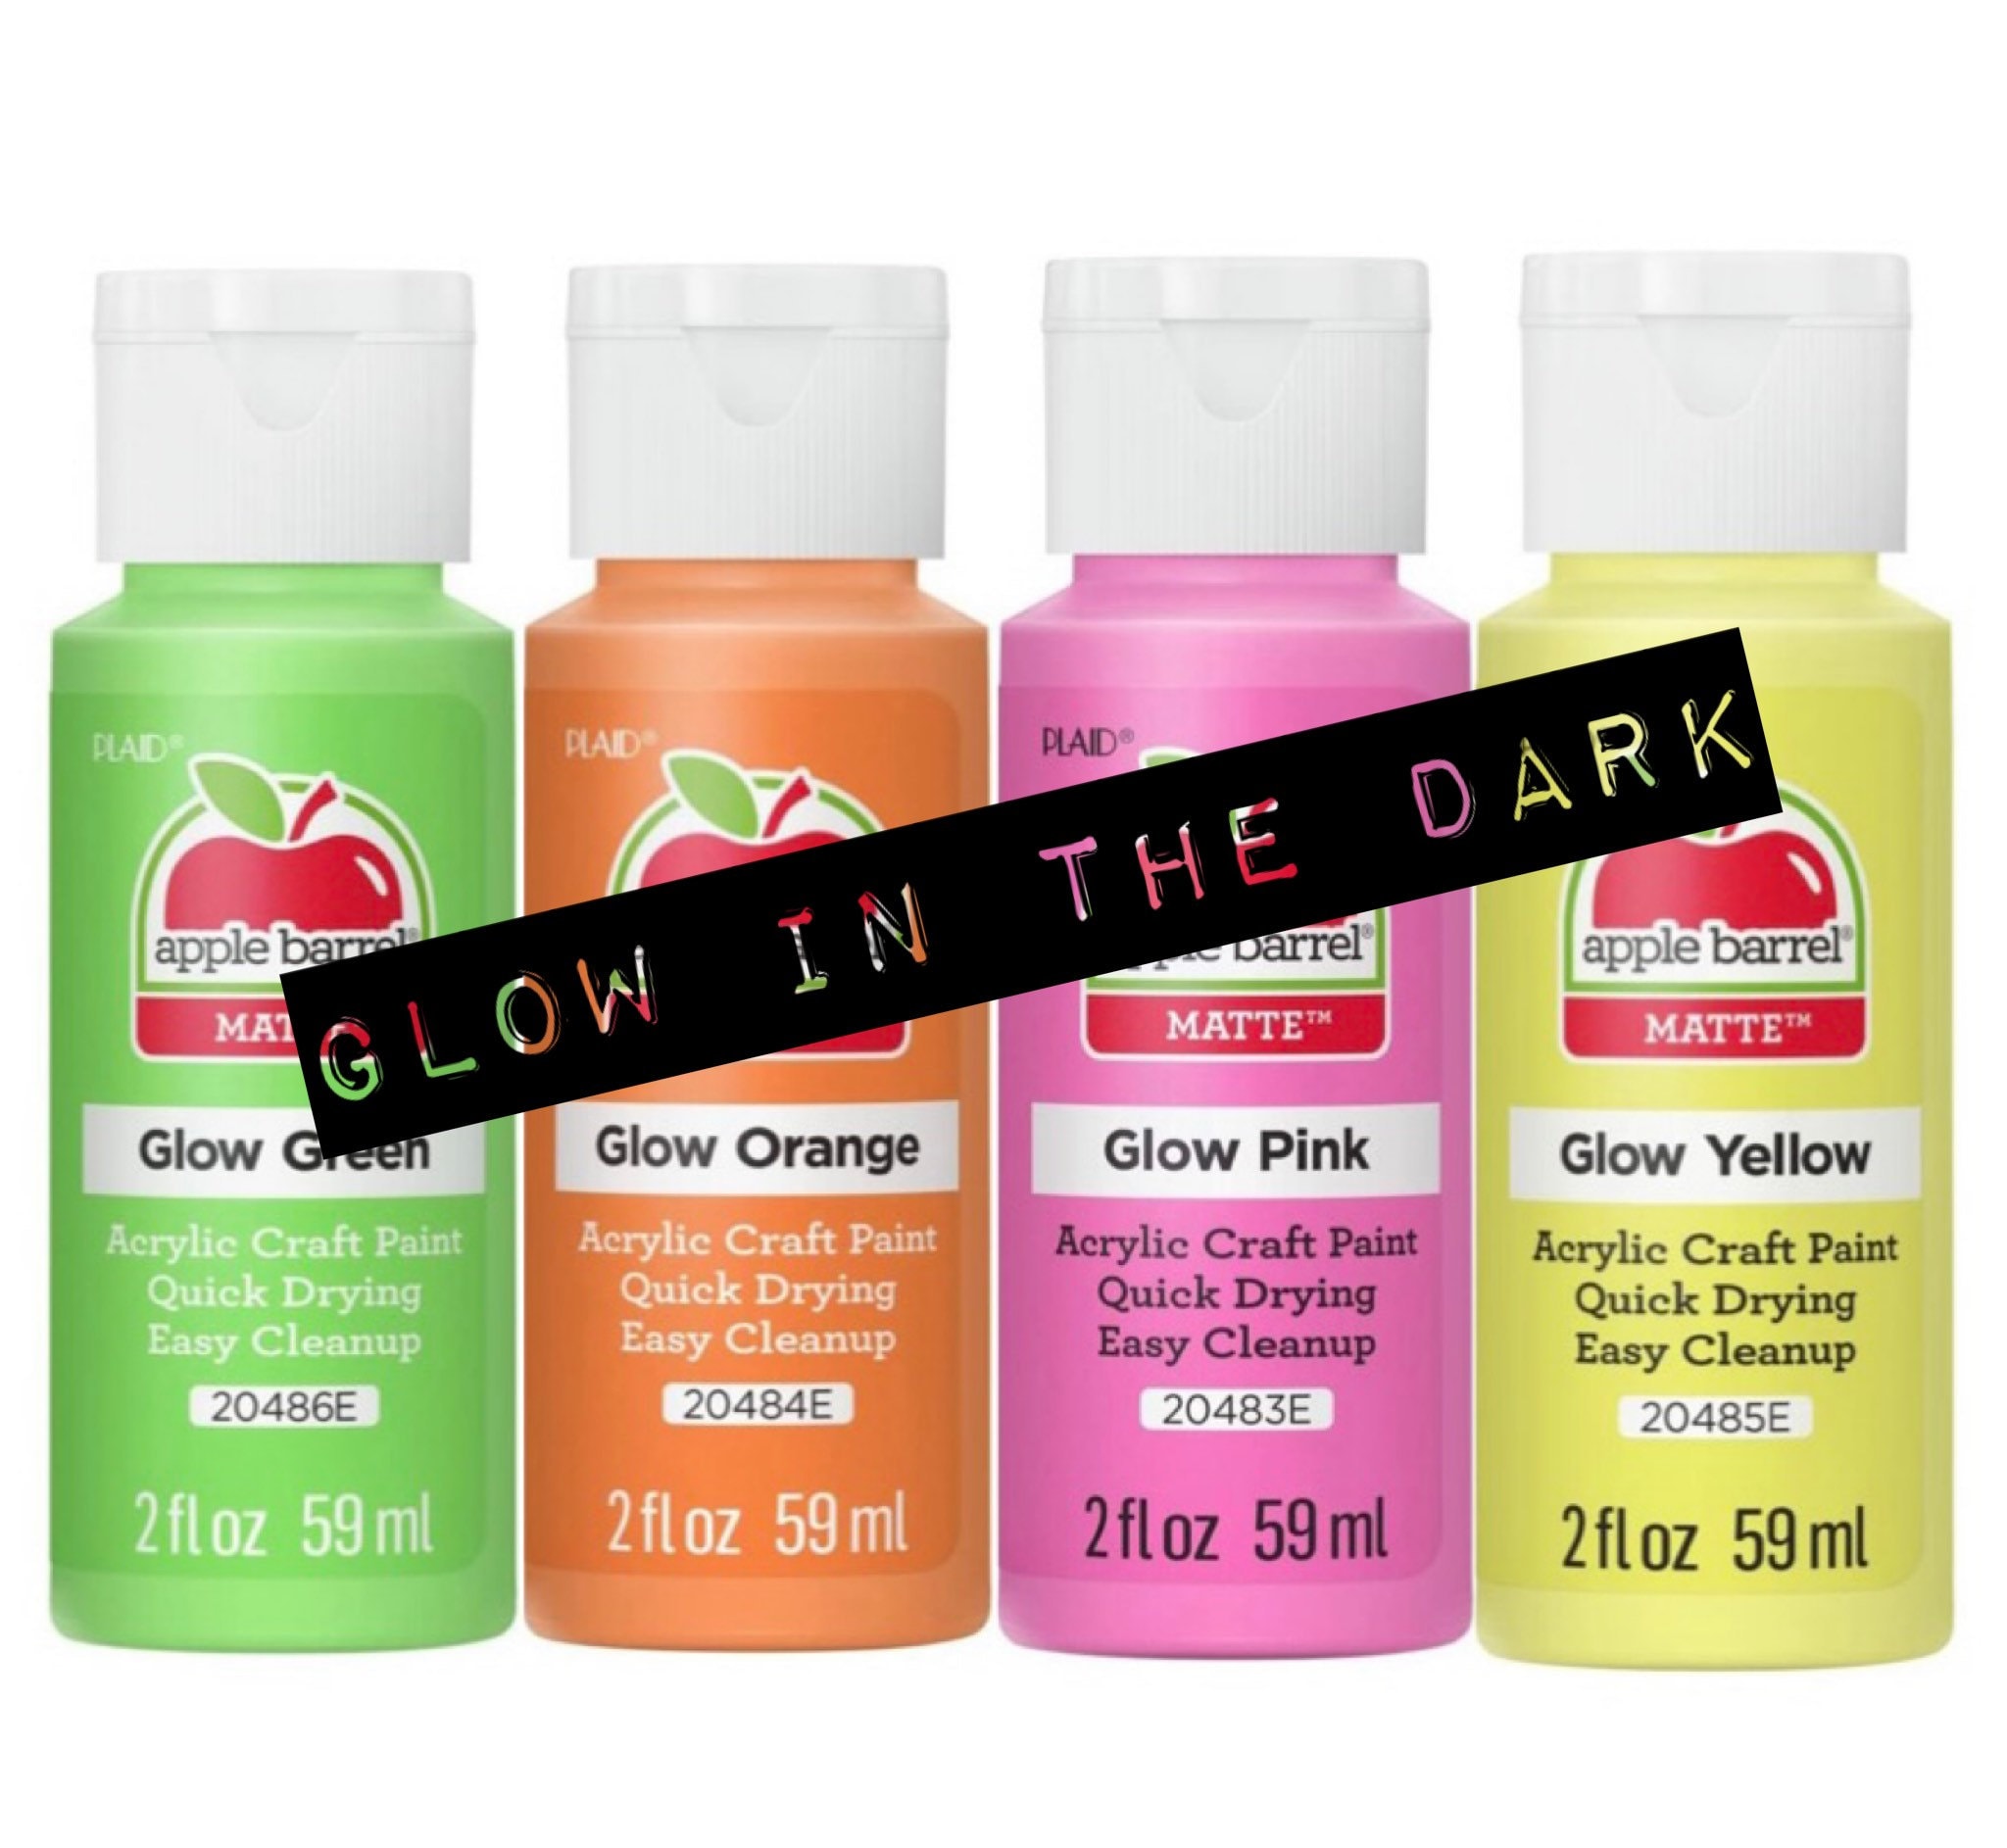 Apple Barrel ® Glow-in-the-dark 2 Oz Acrylic Paint. Buy More & Save on  Shipping 